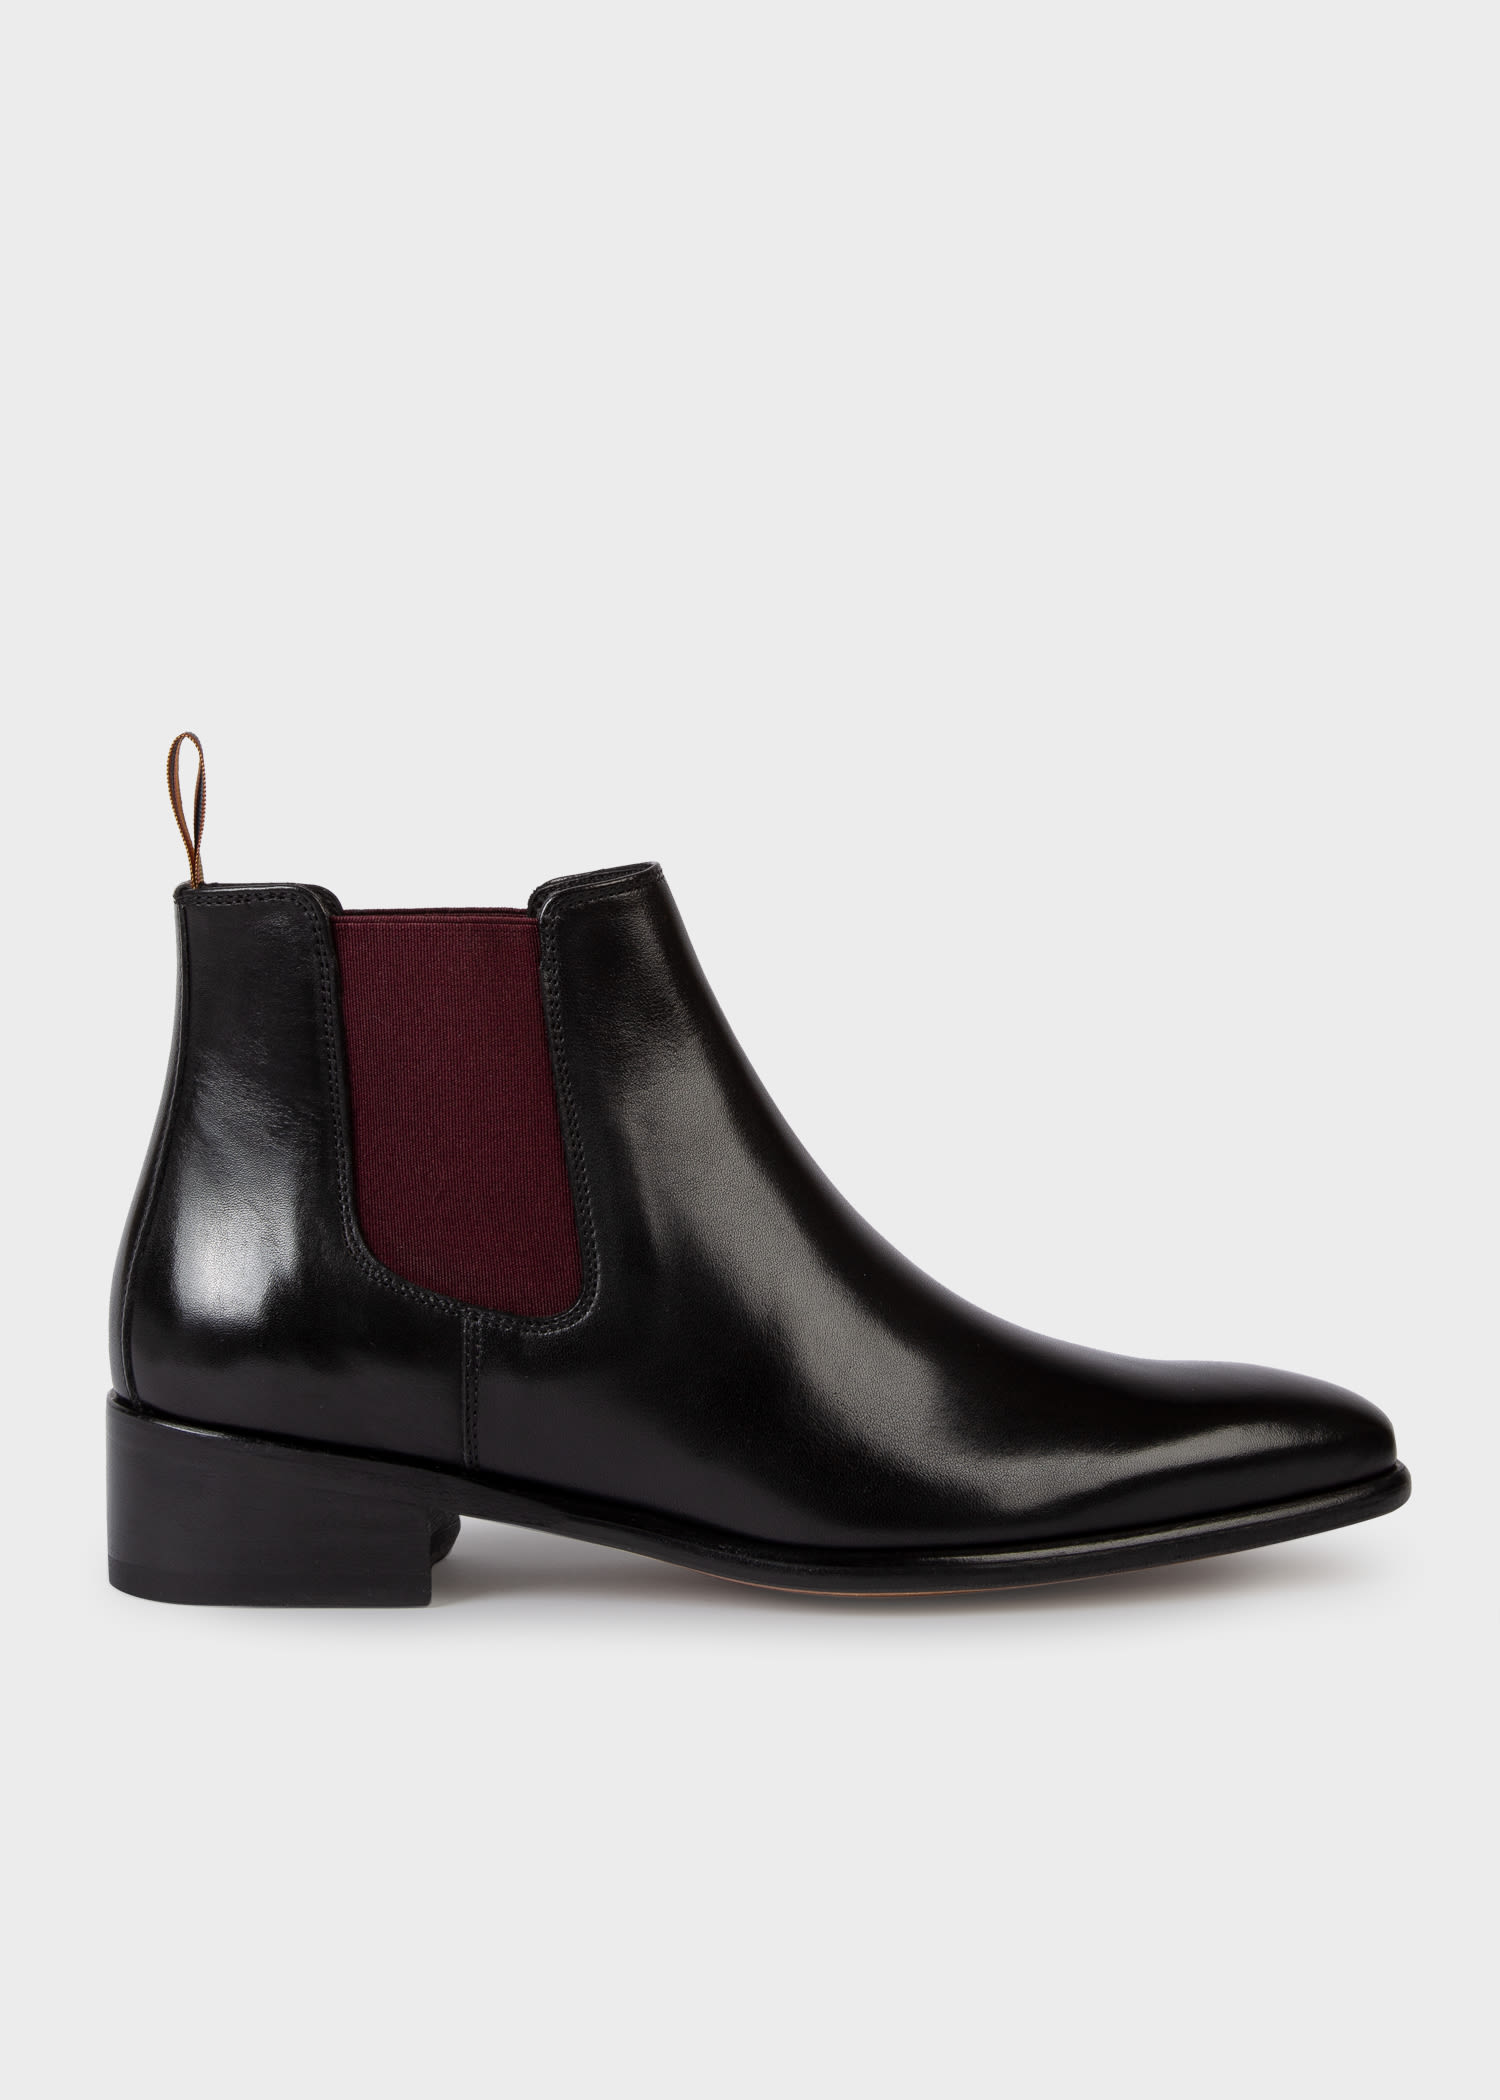 Oxide papir Angreb Women's Black Leather 'Jackson' Chelsea Boots Paul Smith